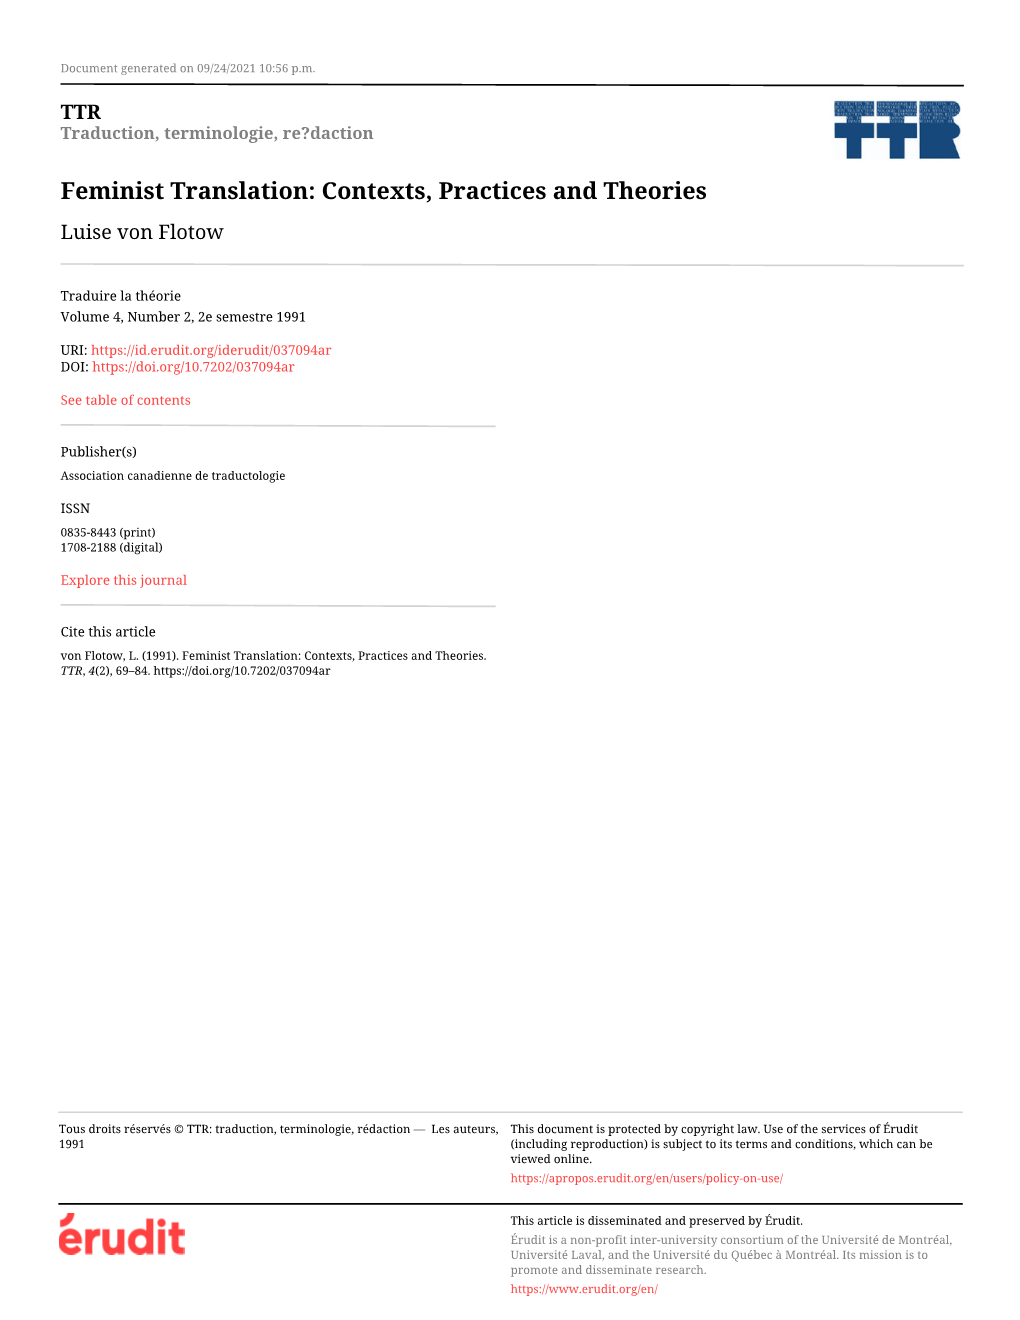 Feminist Translation: Contexts, Practices and Theories Luise Von Flotow